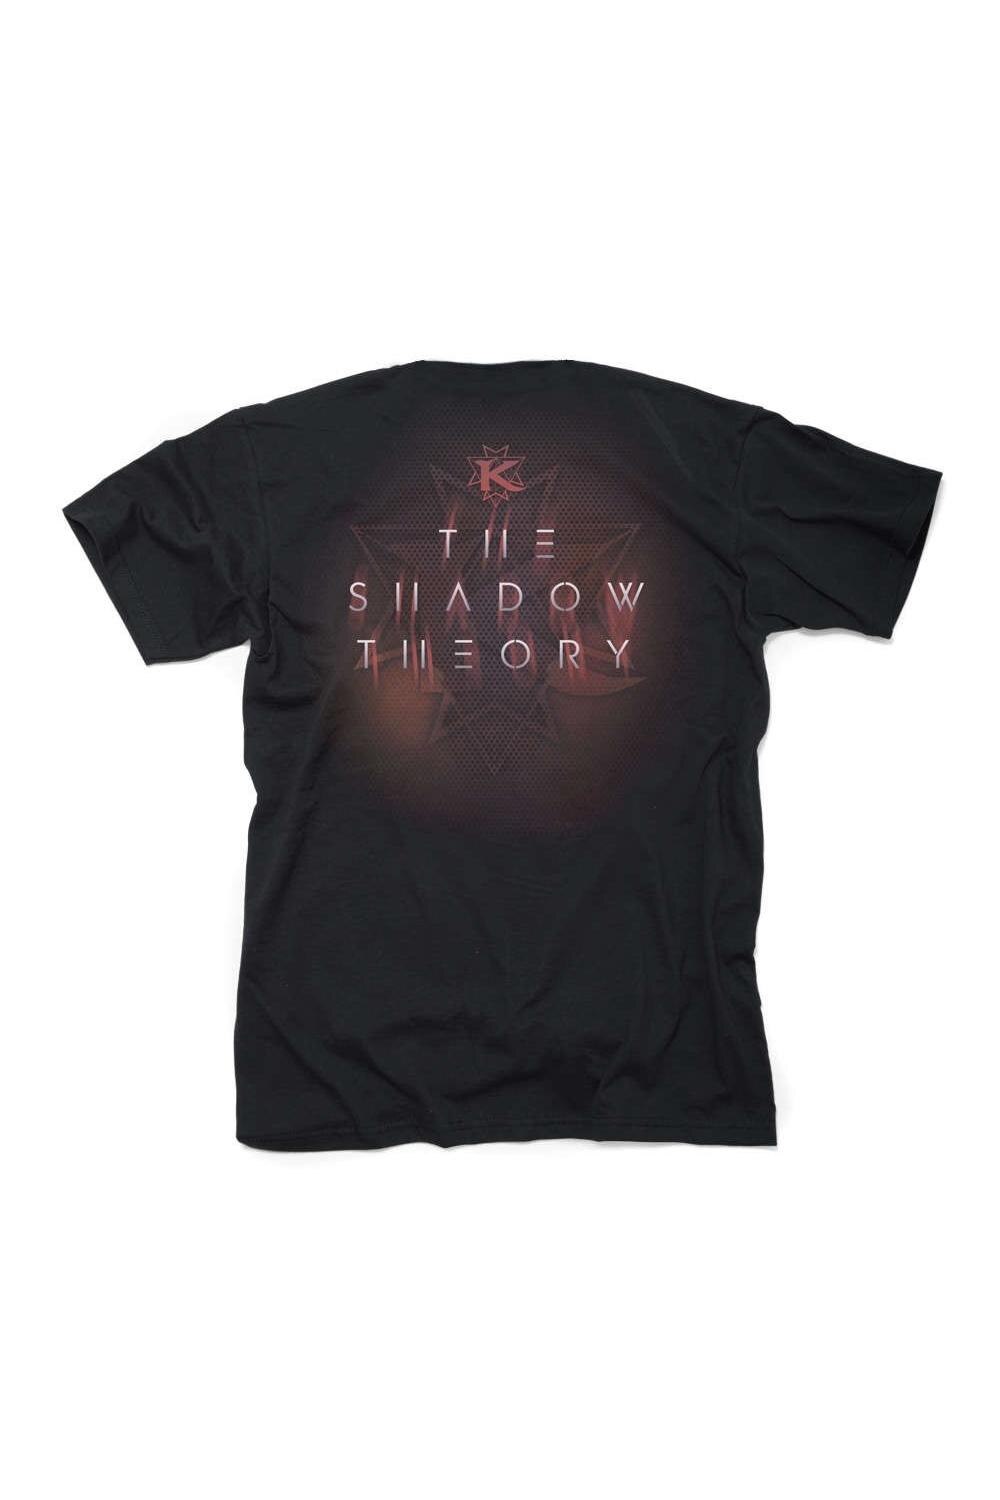 Cherry Set up the table switch Tricou negru pentru barbati, Kamelot, The Shadow Theory, L - eMAG.ro